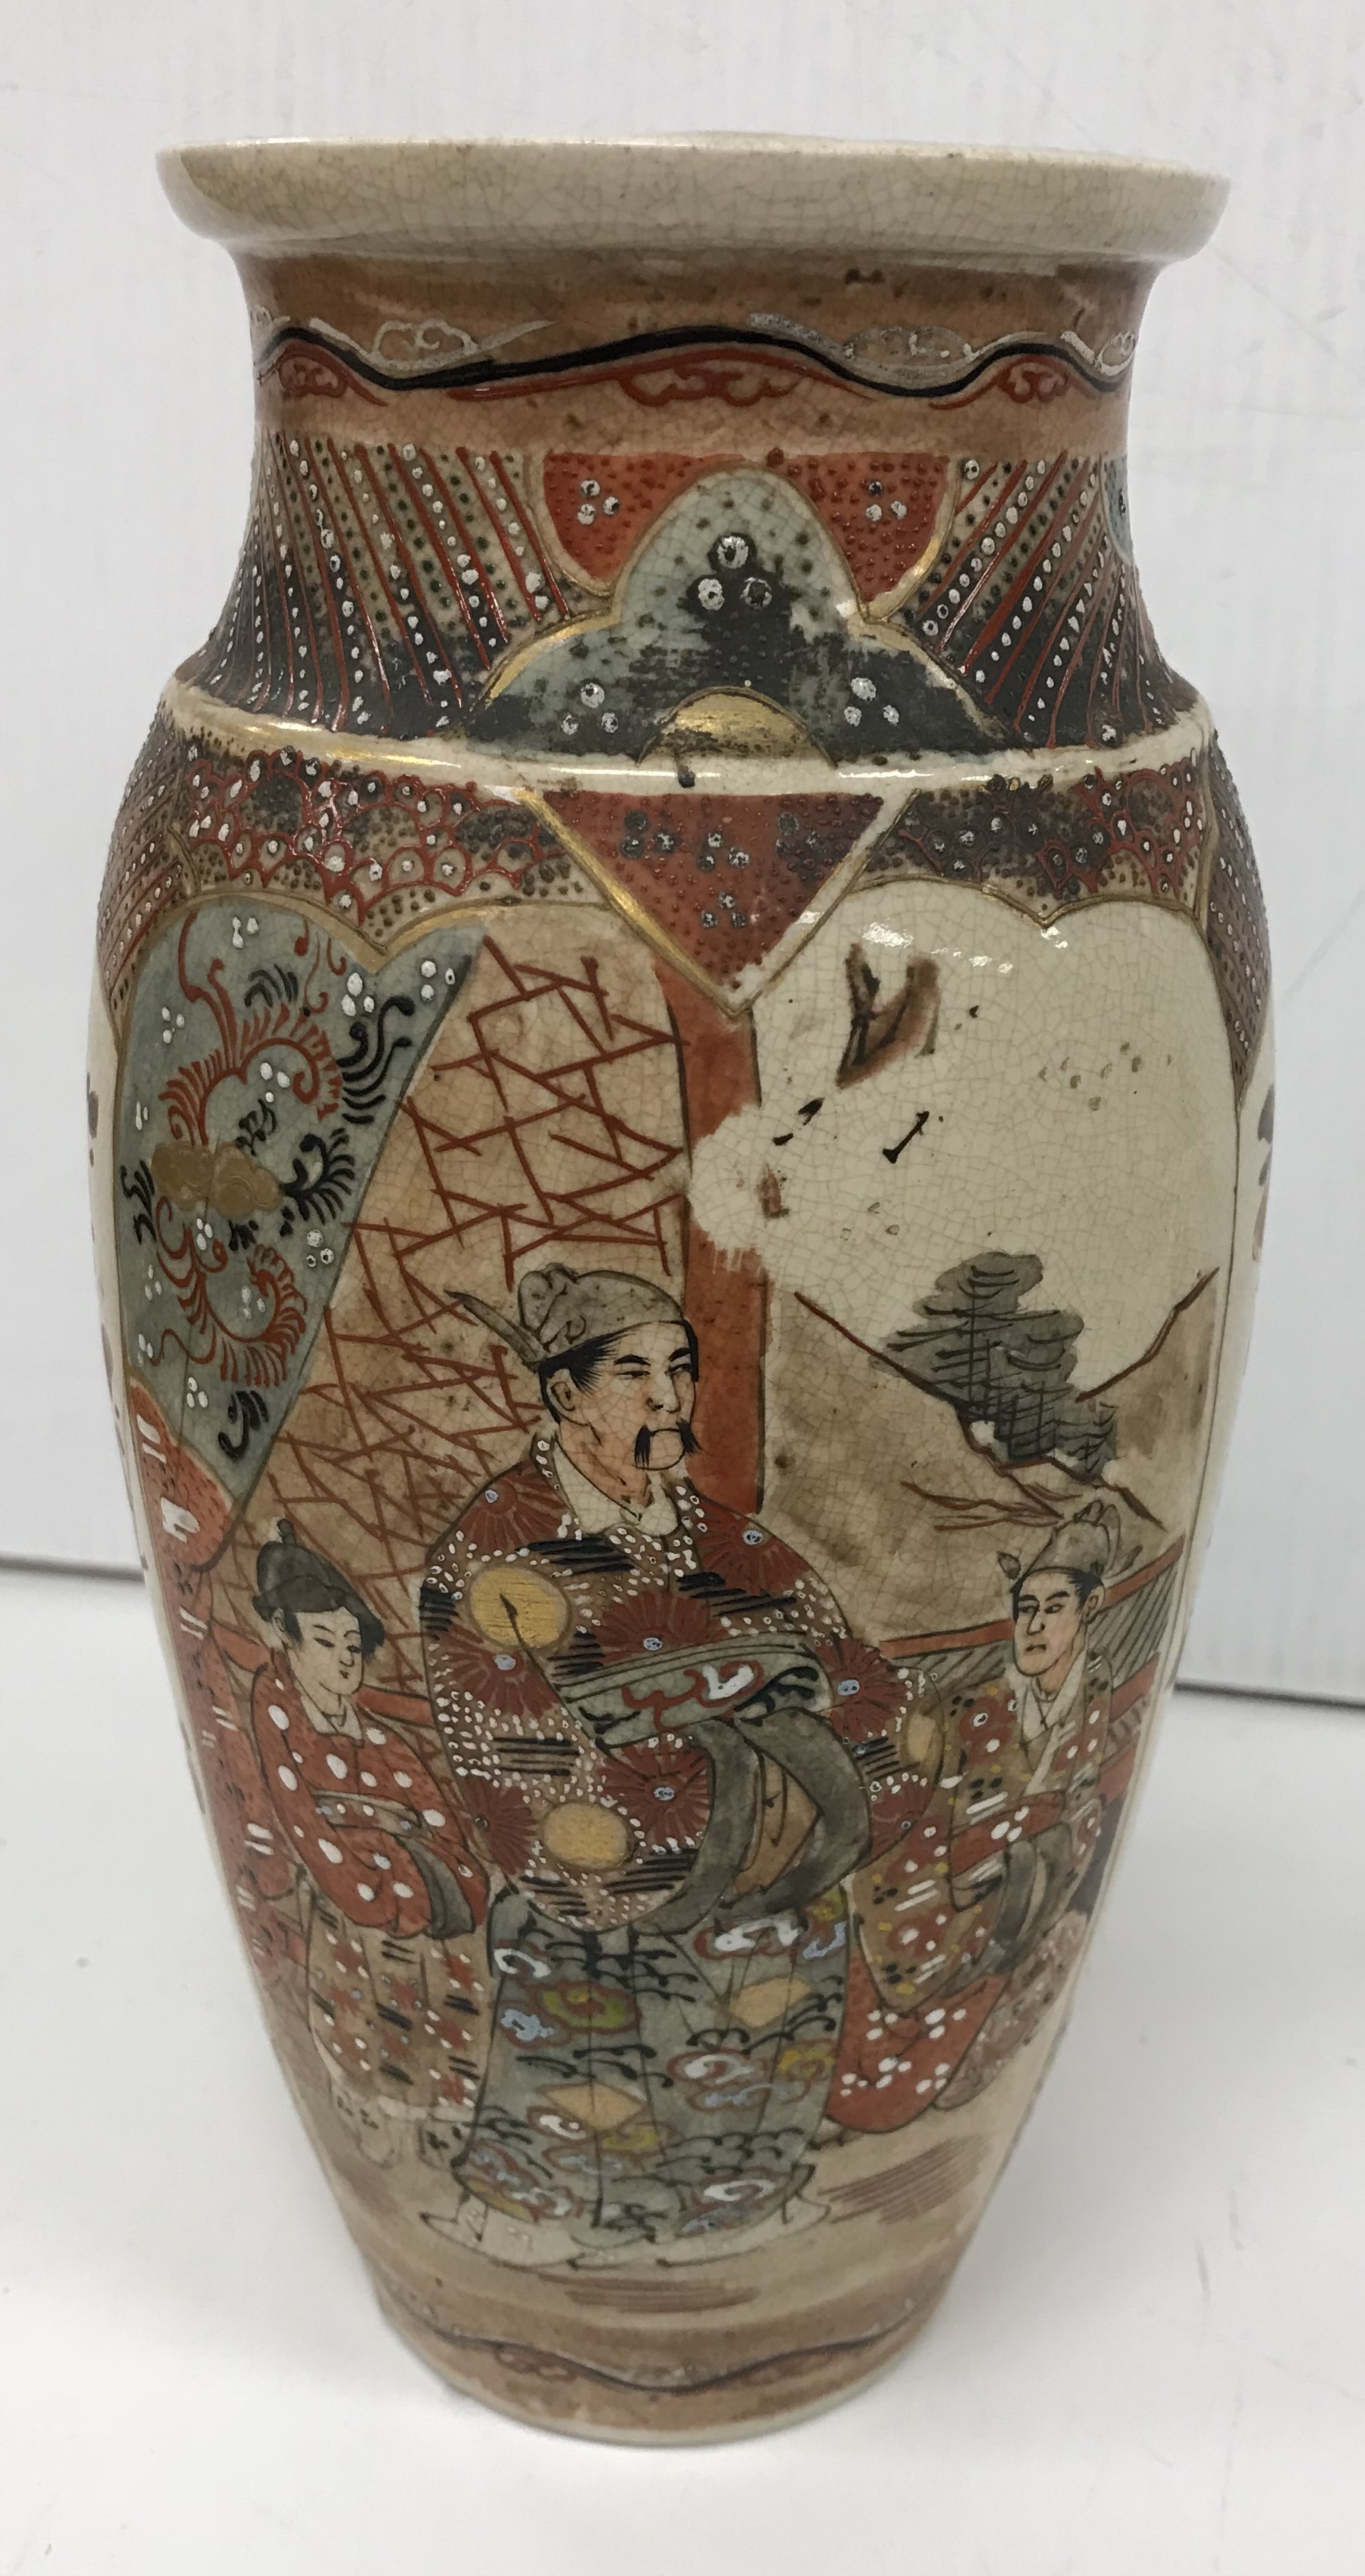 A collection of various Japanese and Chinese pottery and porcelain including a Japanese dragon - Image 7 of 10